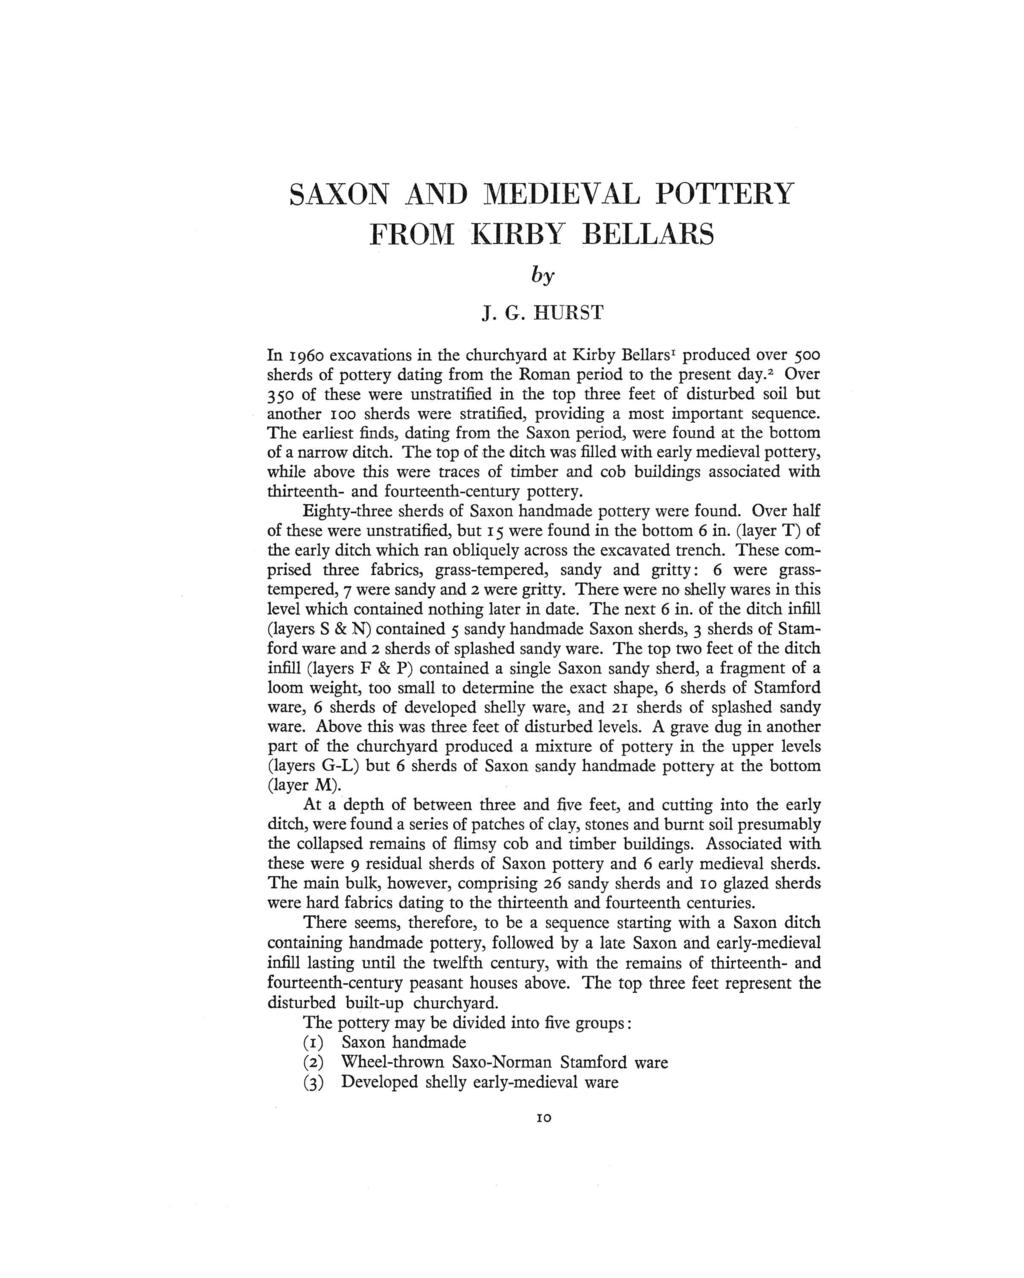 SAXON AND MEDEVAL POTTERY FROi!(RBY BELLARS by J. G. HURST n 1960 excavations in the churchyard at Kirby Bellars 1 produced over 500 sherds of pottery dating from the Roman period to the present day.